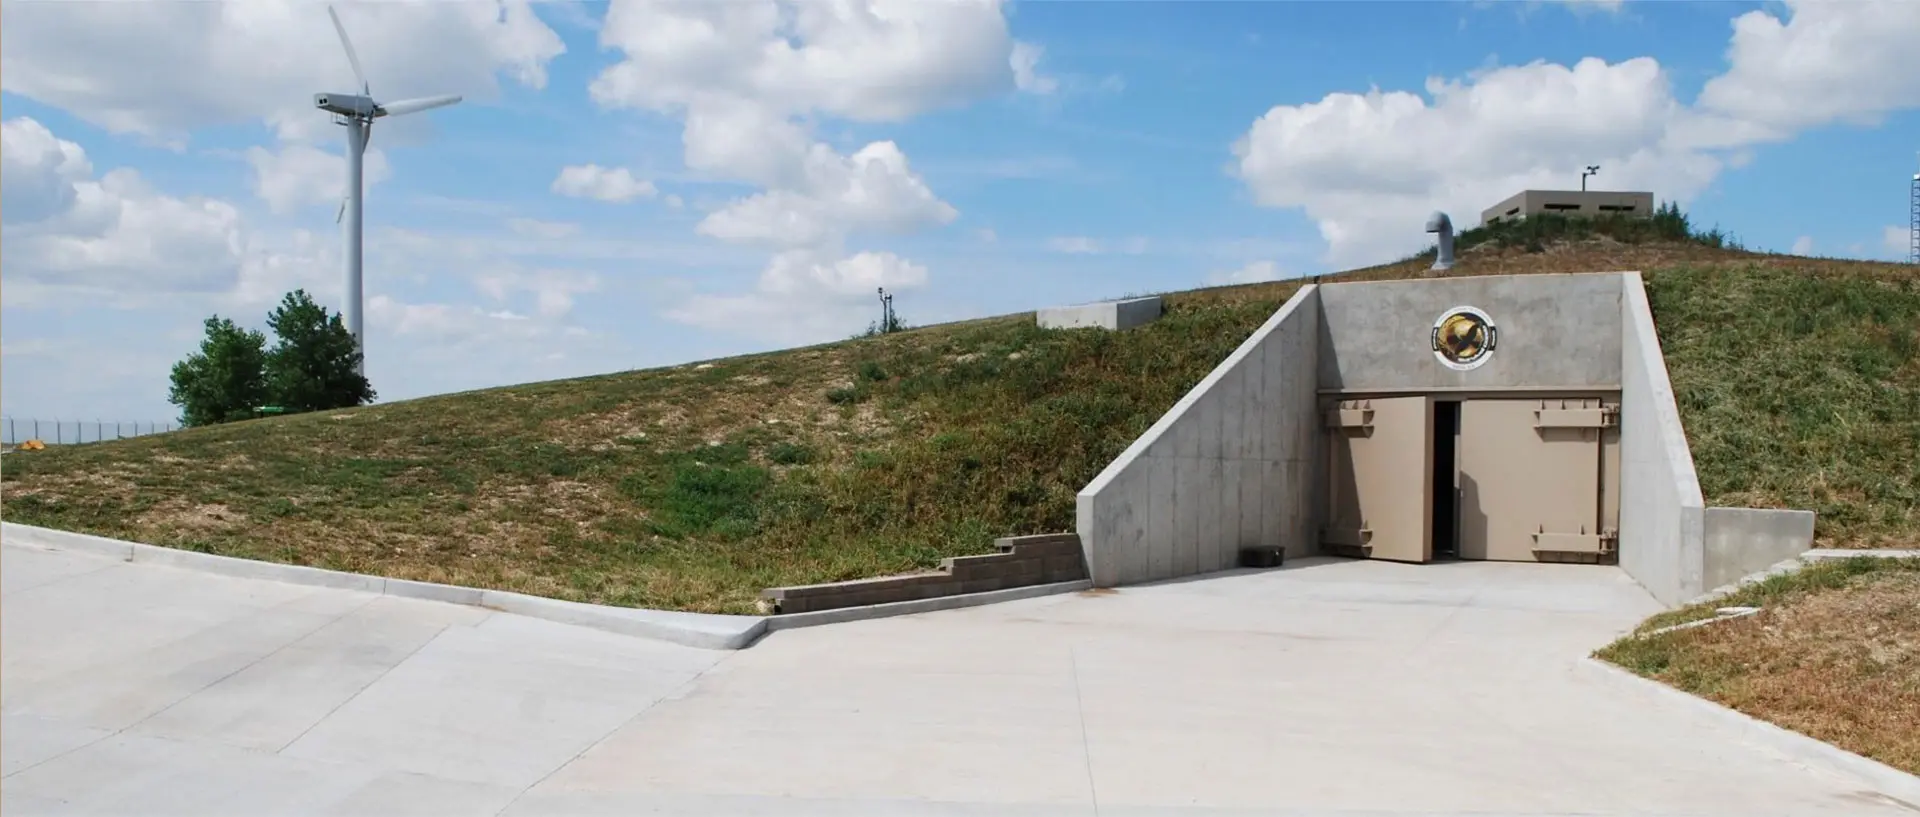 A concrete ramp on the side of a hill.